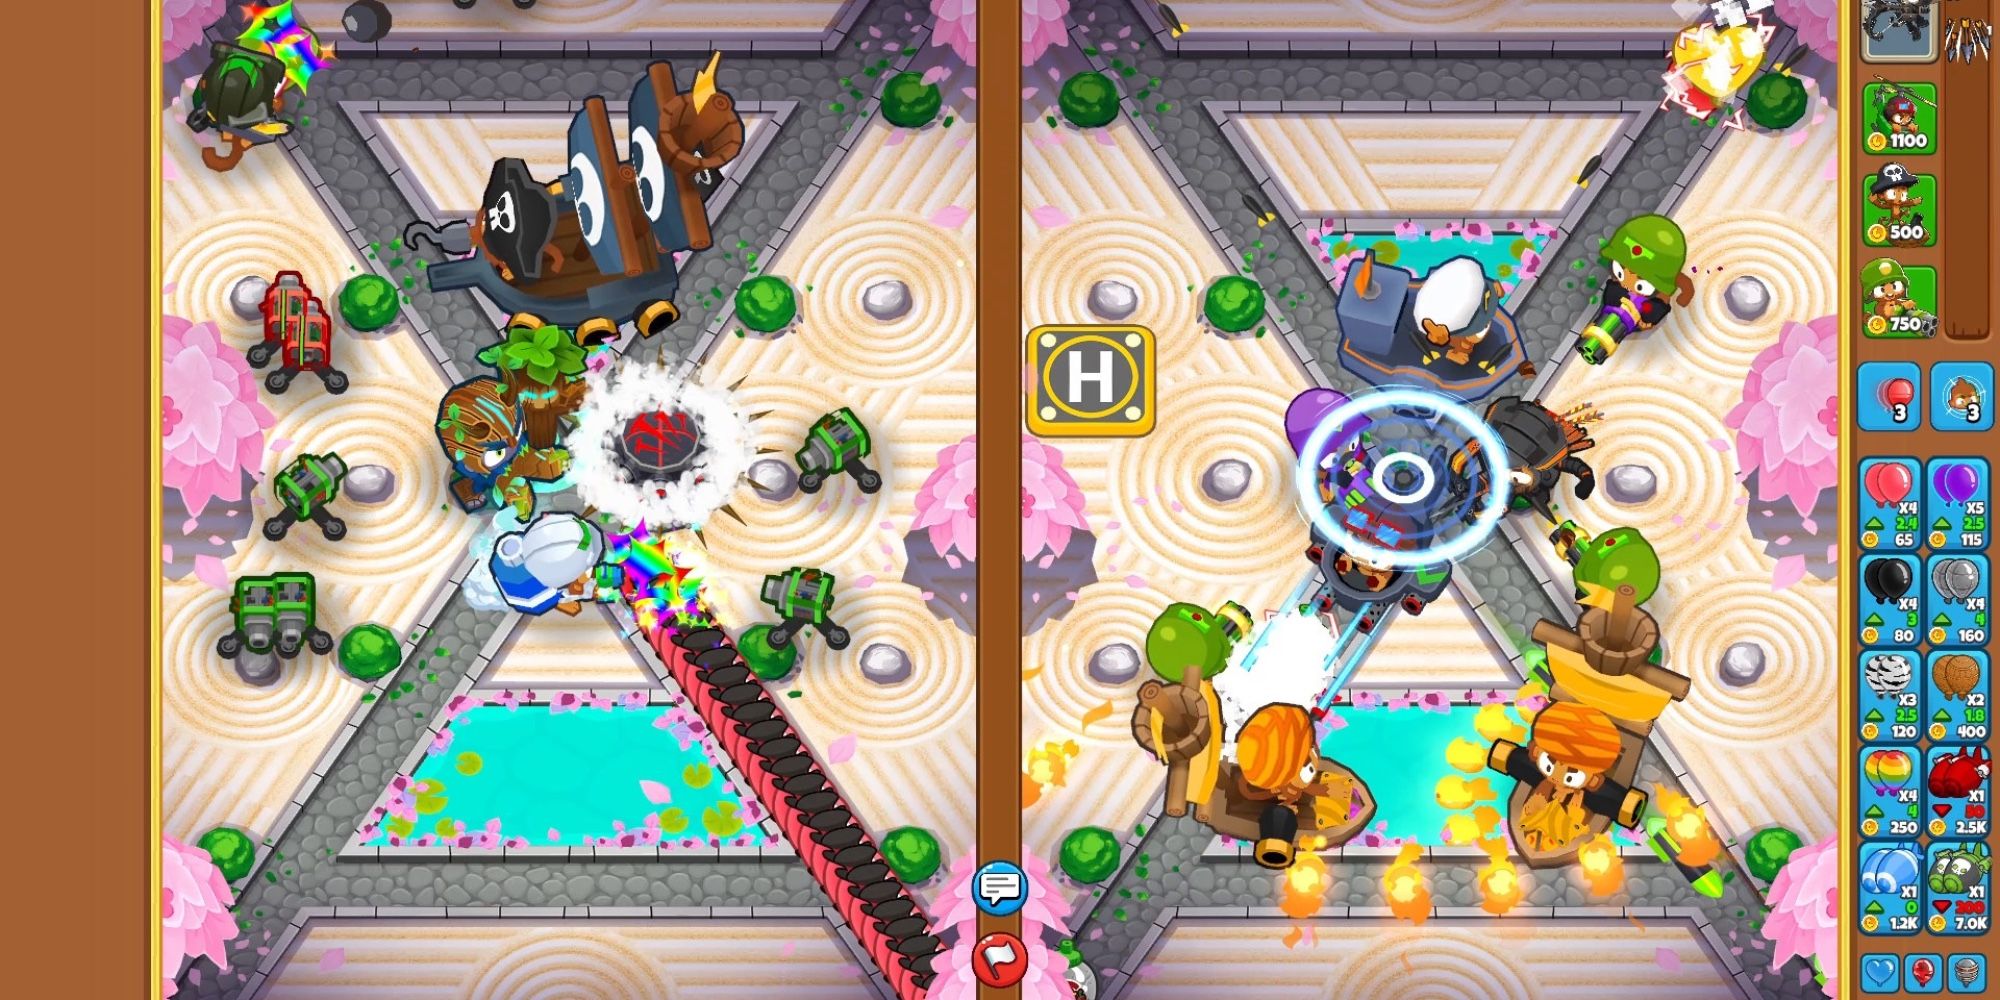 Free-to-play Games - Bloons TD Battles 2 - Player bursts balloons in PvP mode